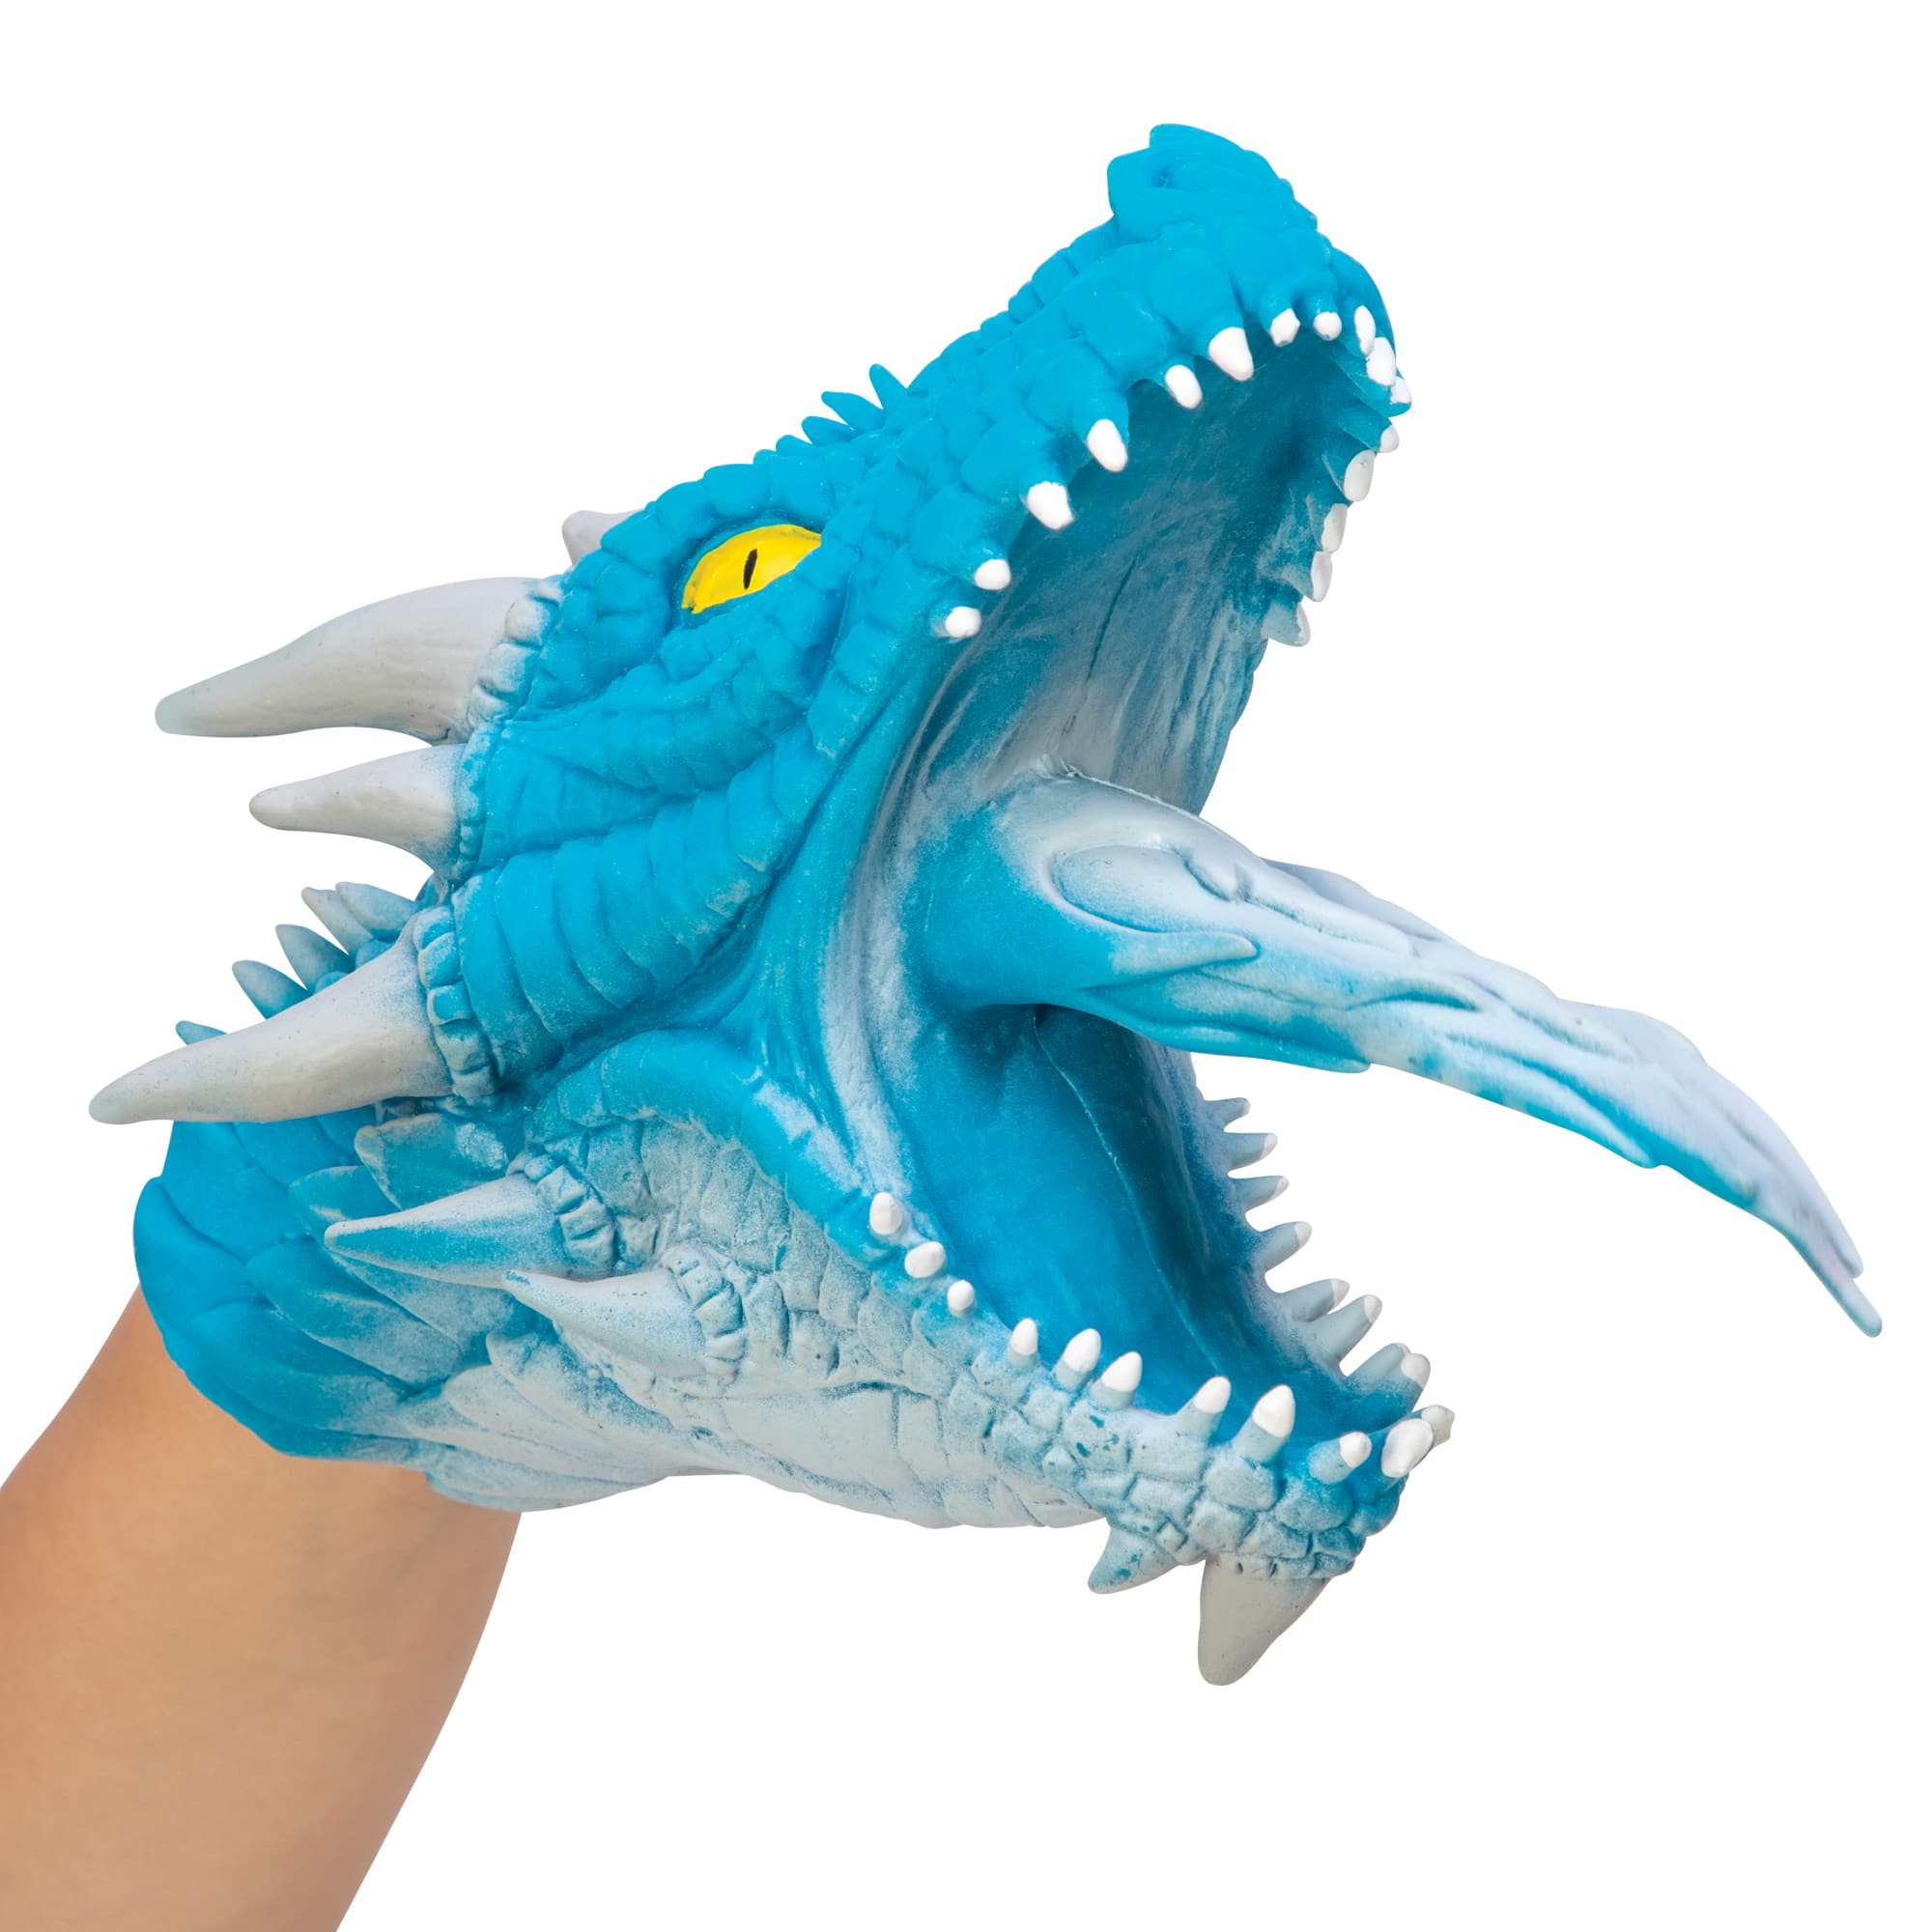 Front view of a green dragon hand puppet on a hand.